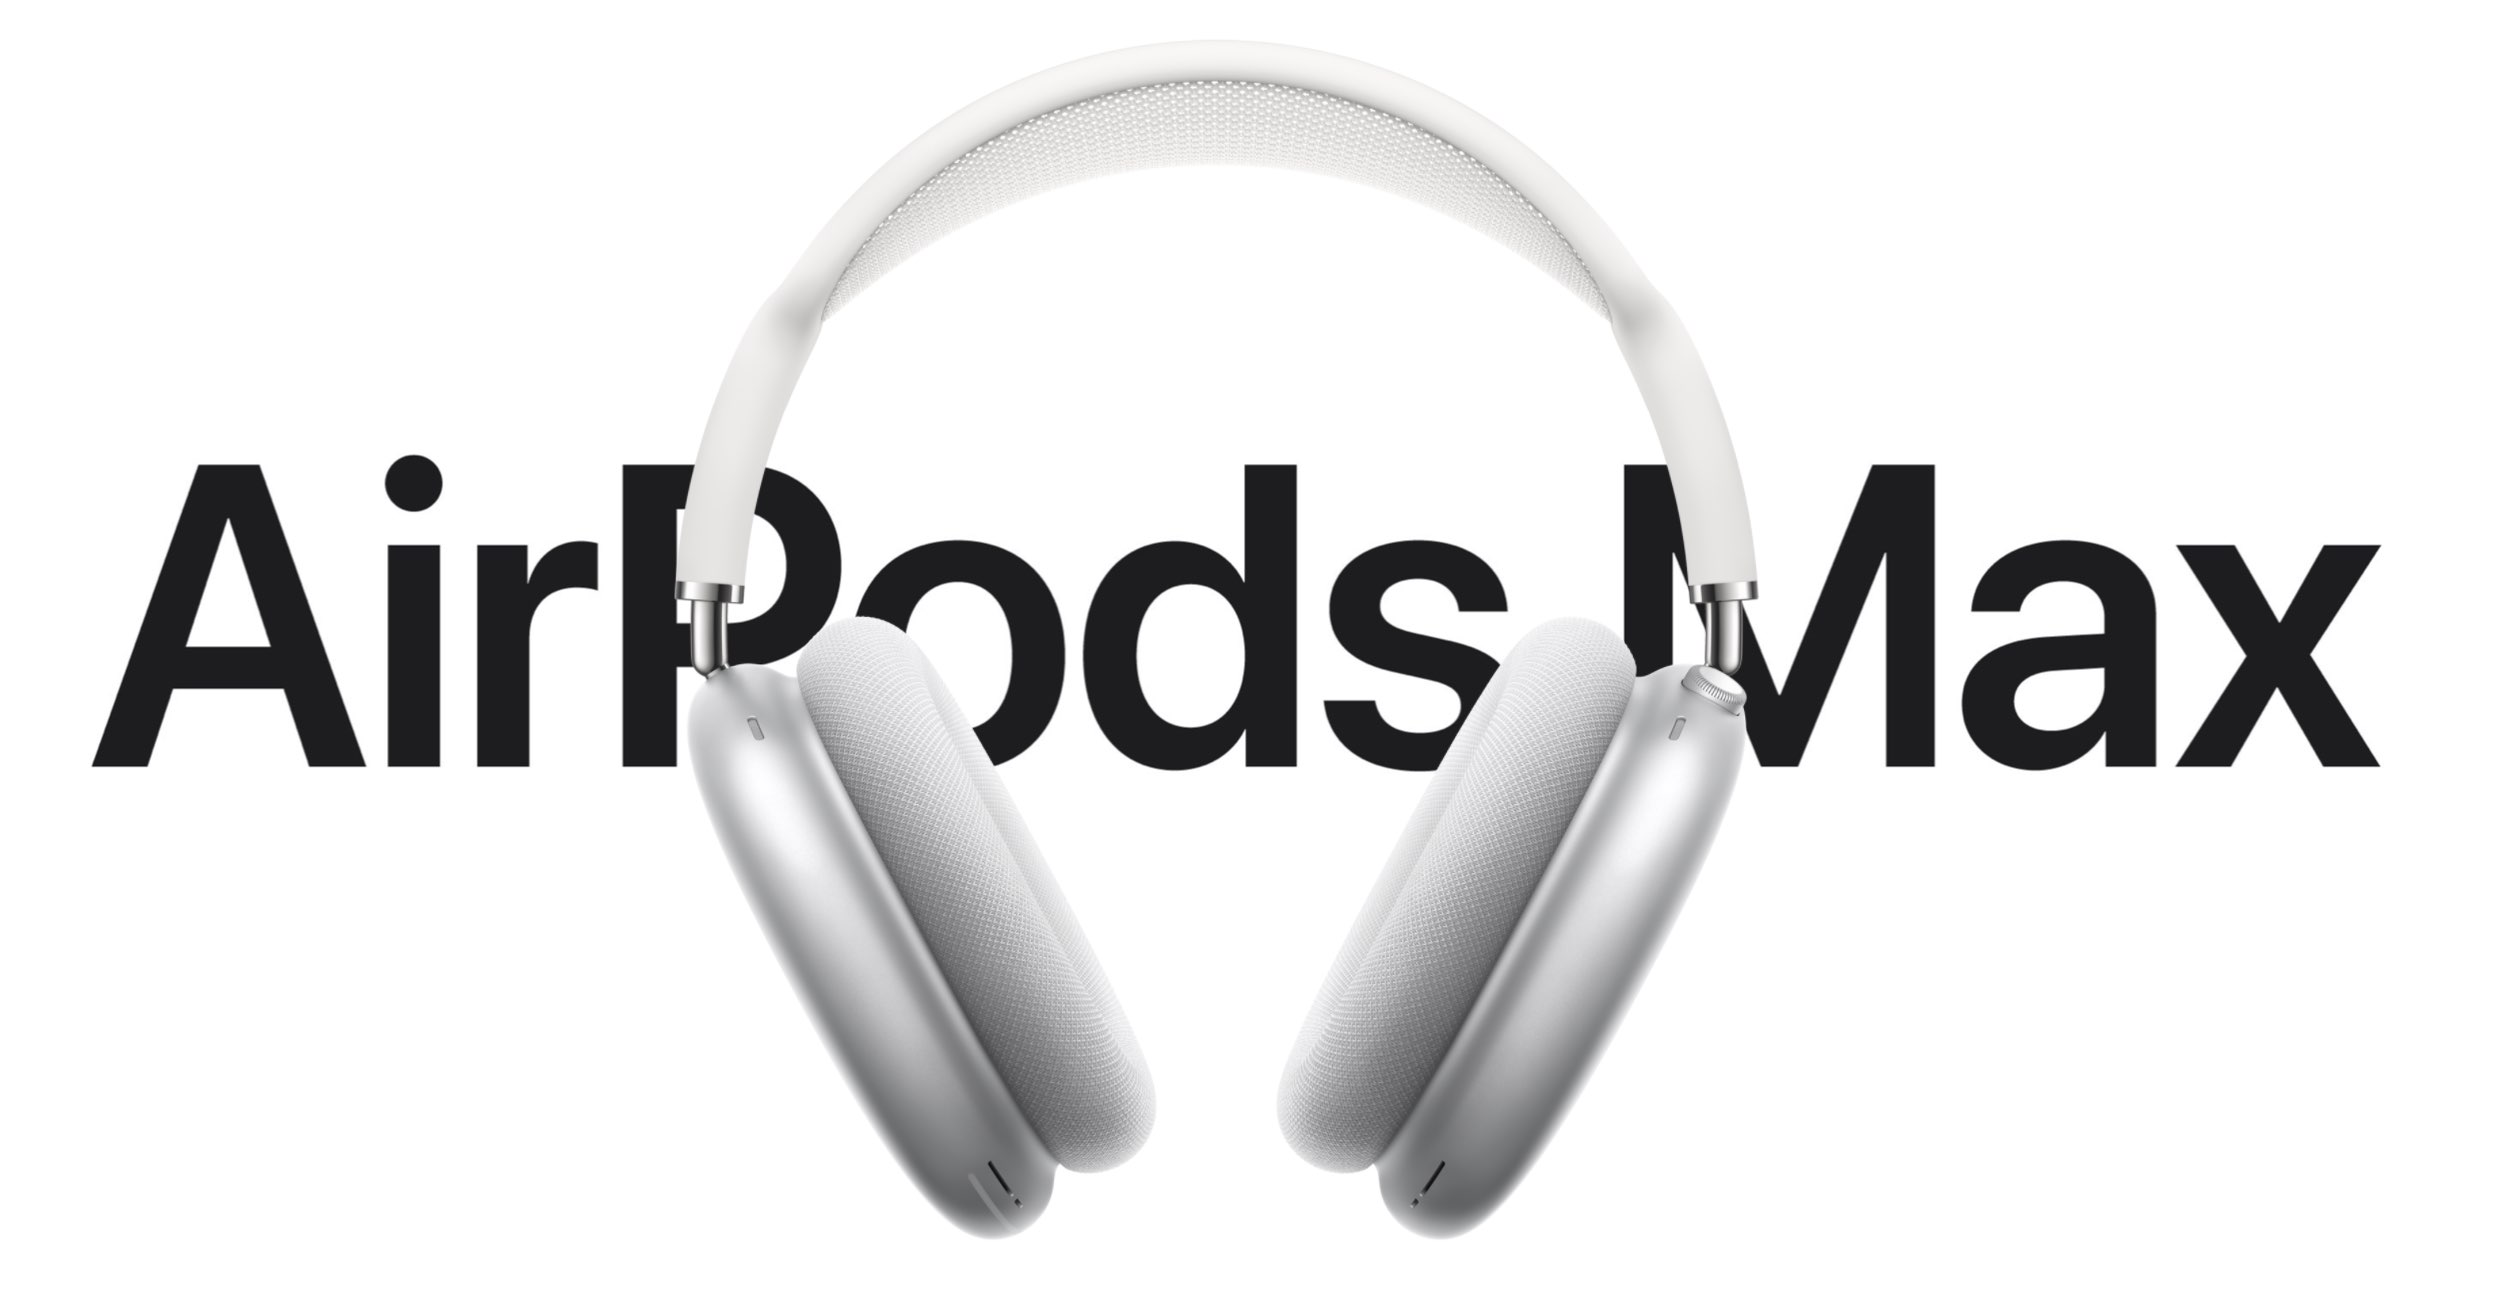 Apple updates AirPods Max firmware to 6A324